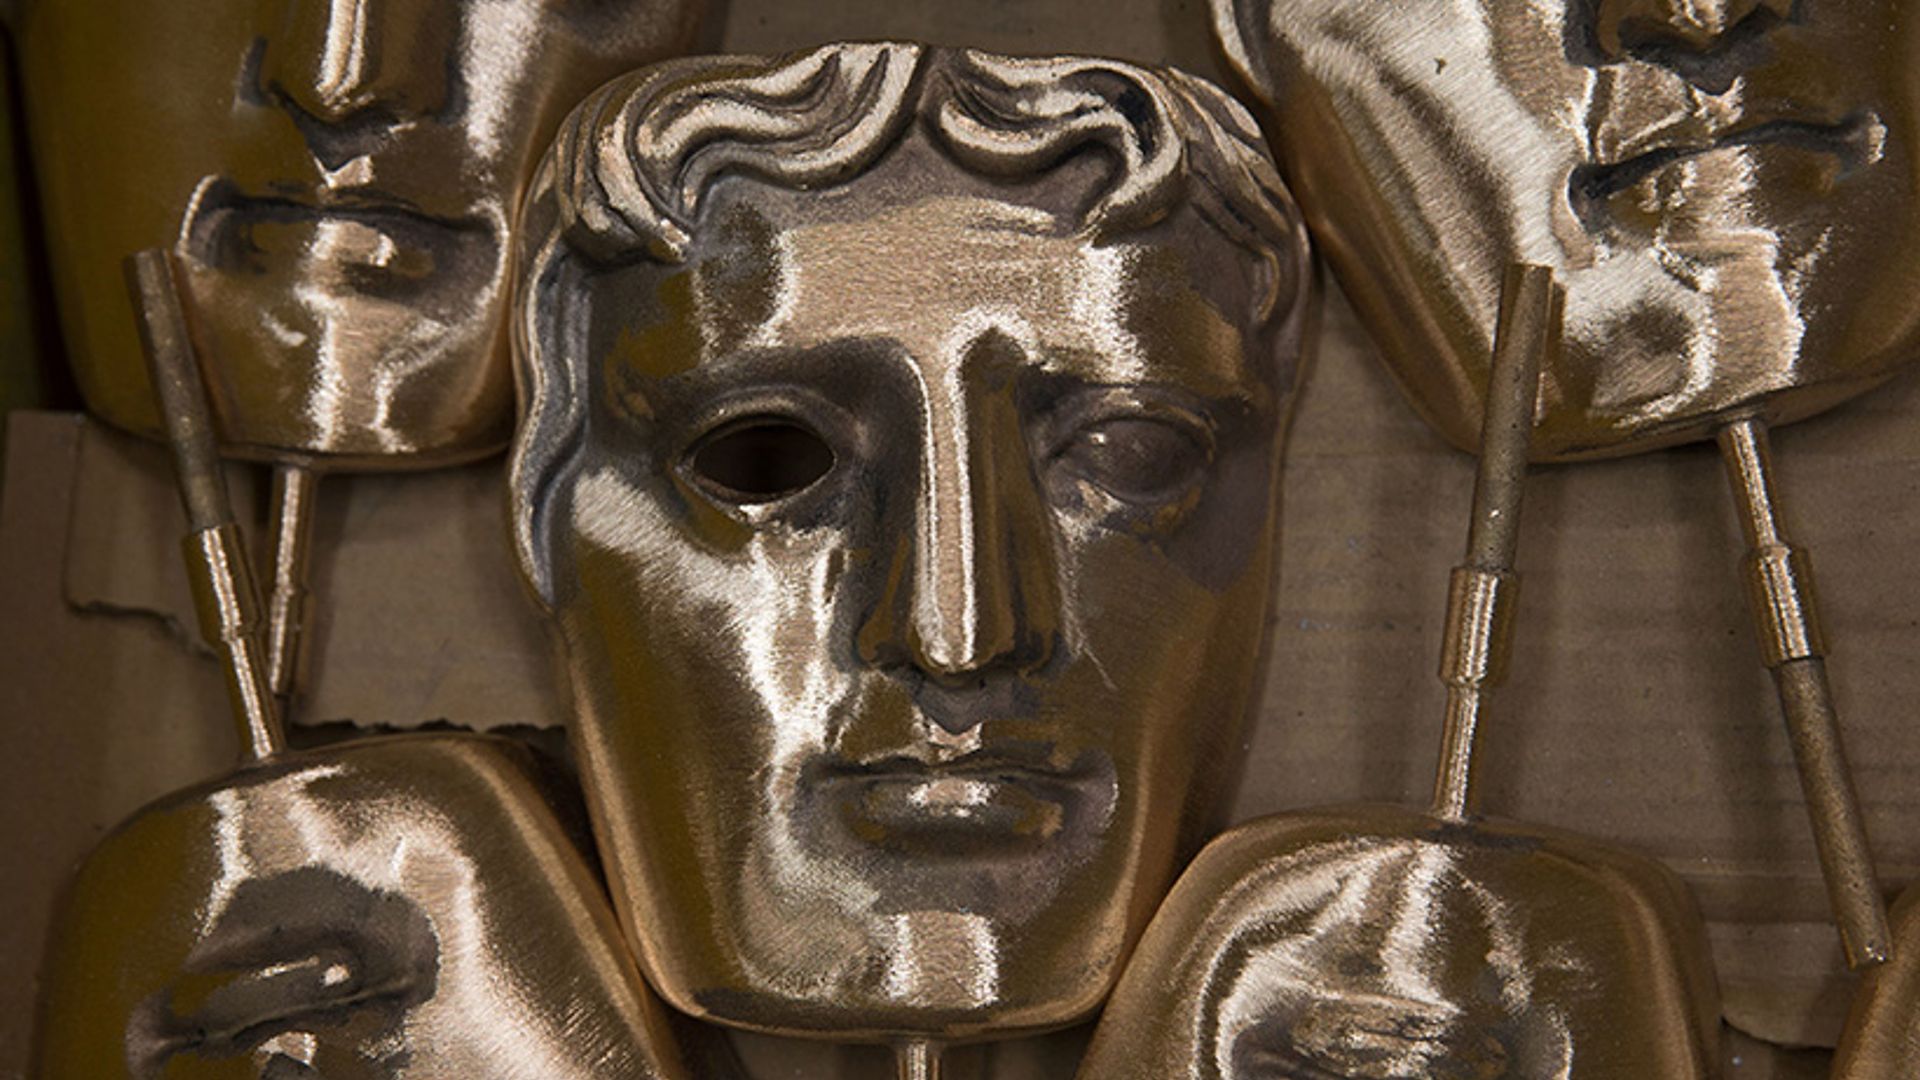 See the full list of BAFTA nominations here!